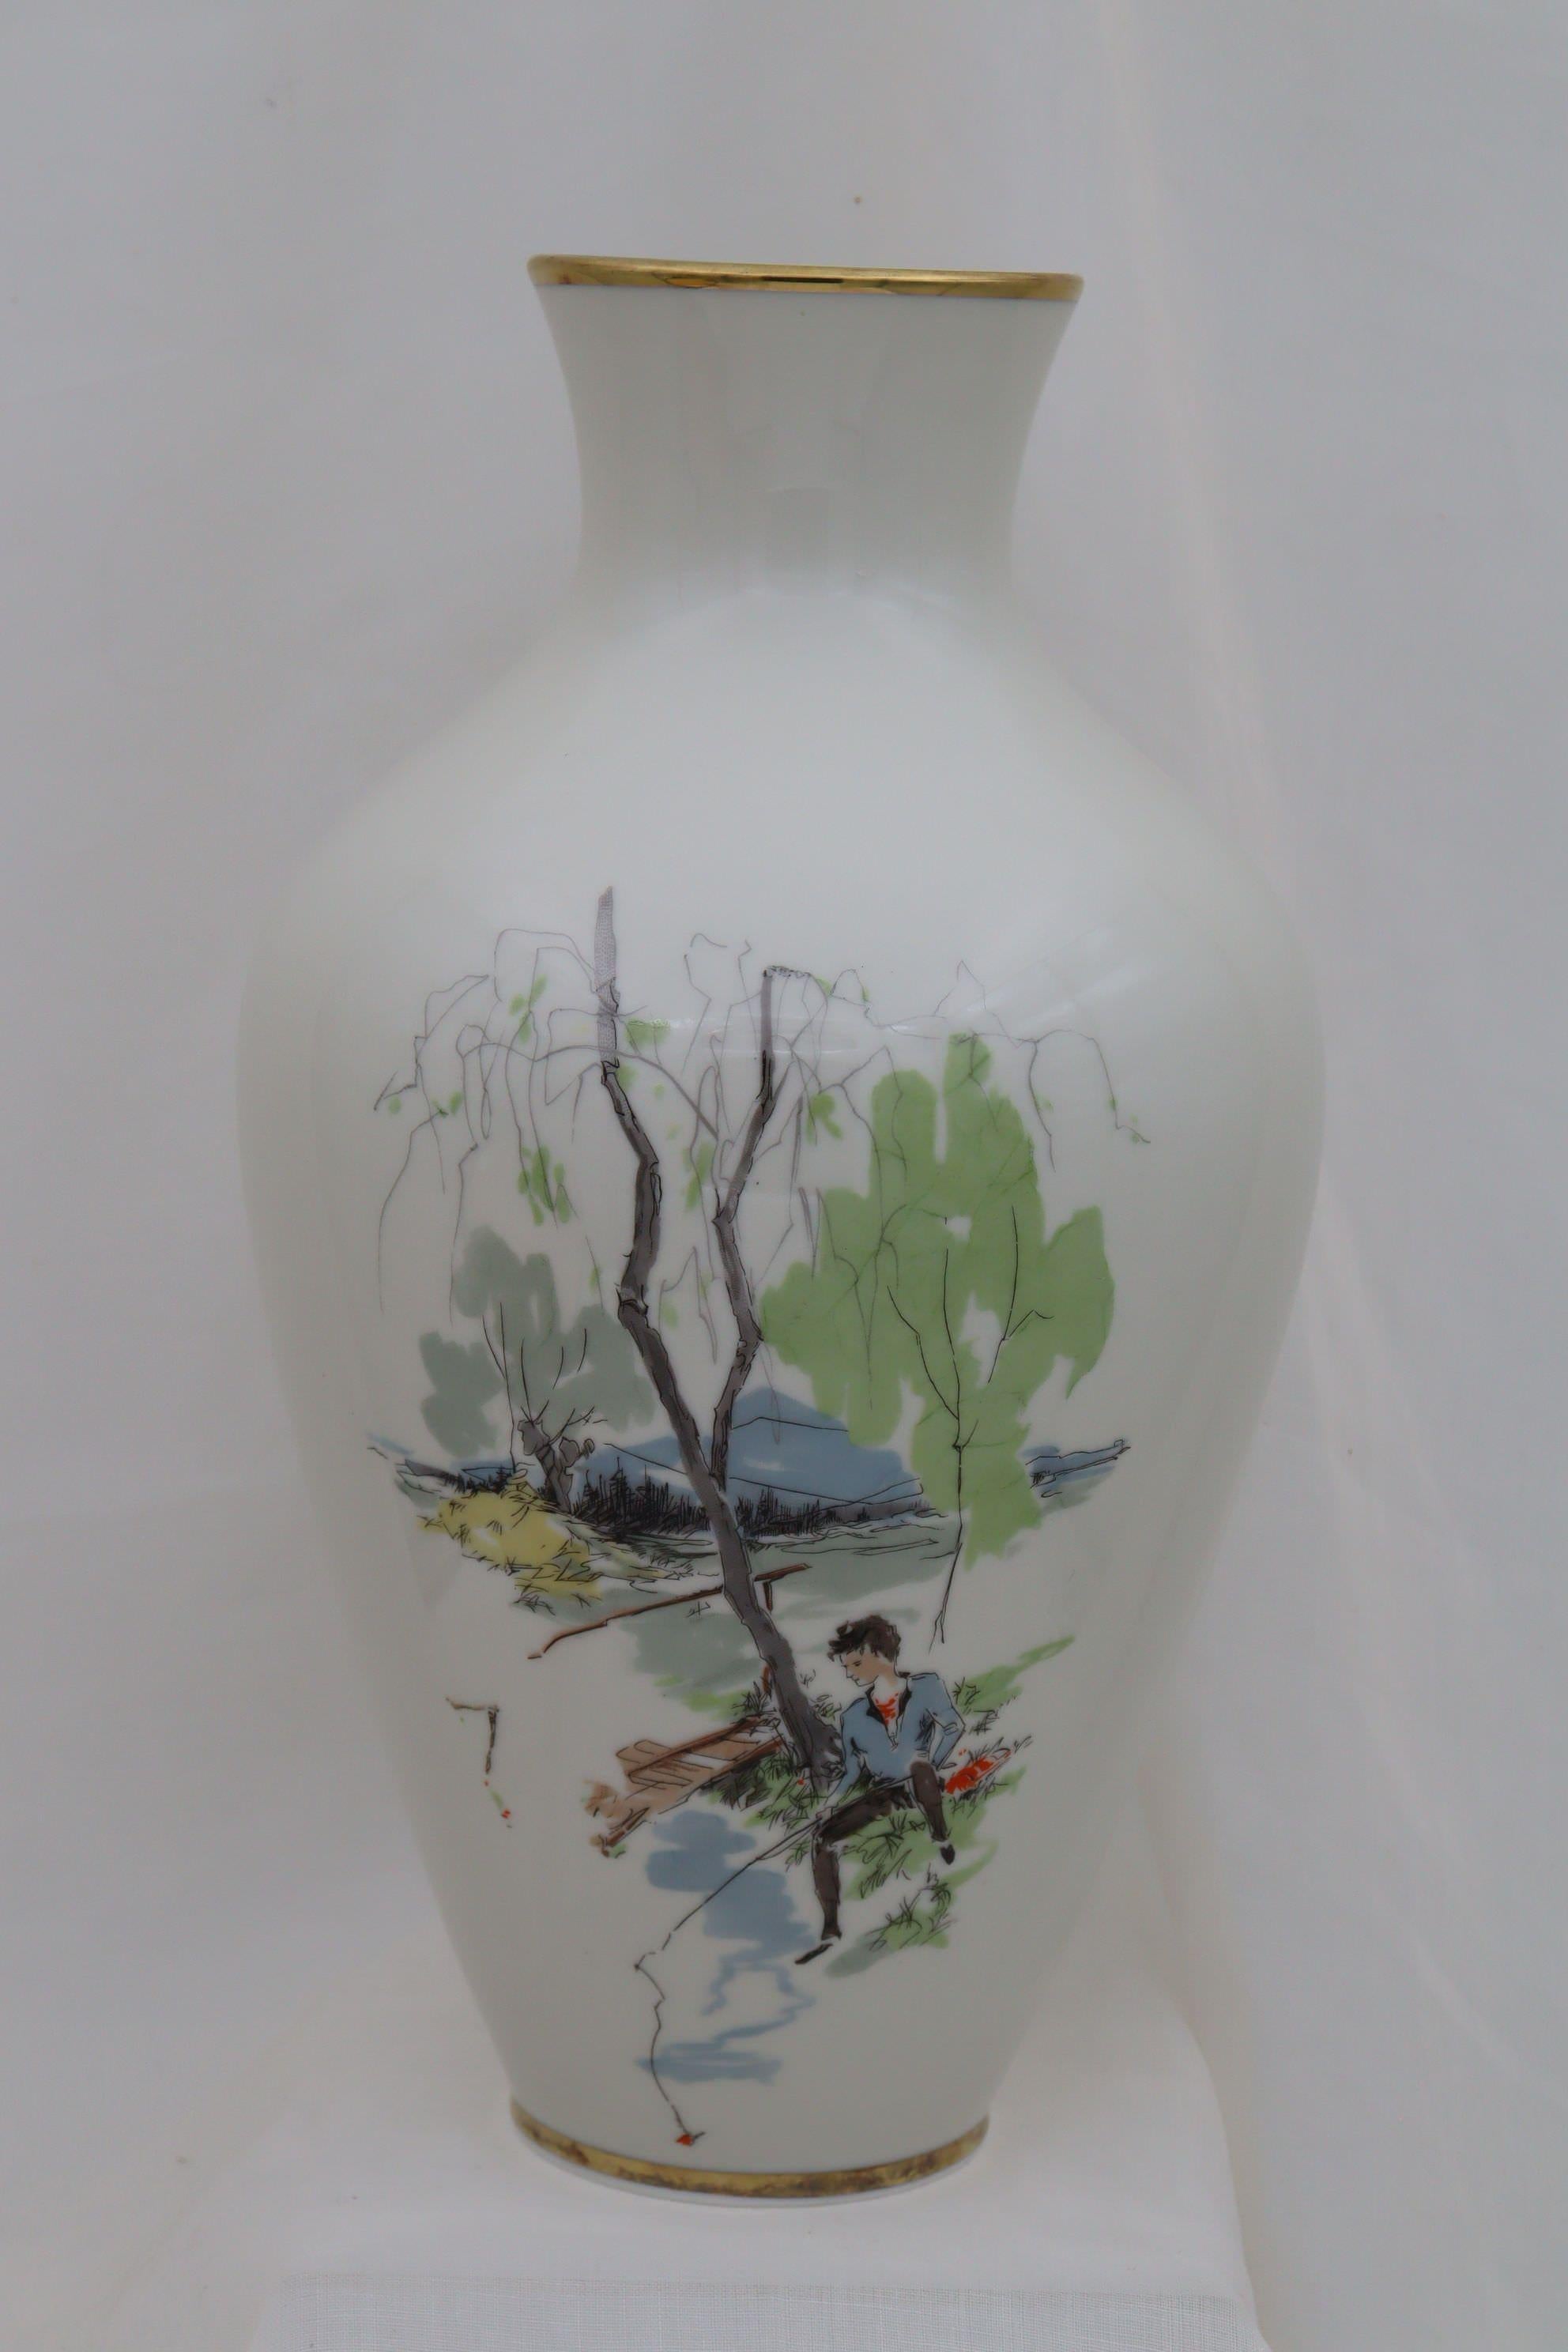 The title of this large porcelain vase by Alka Kunst of Germany is 